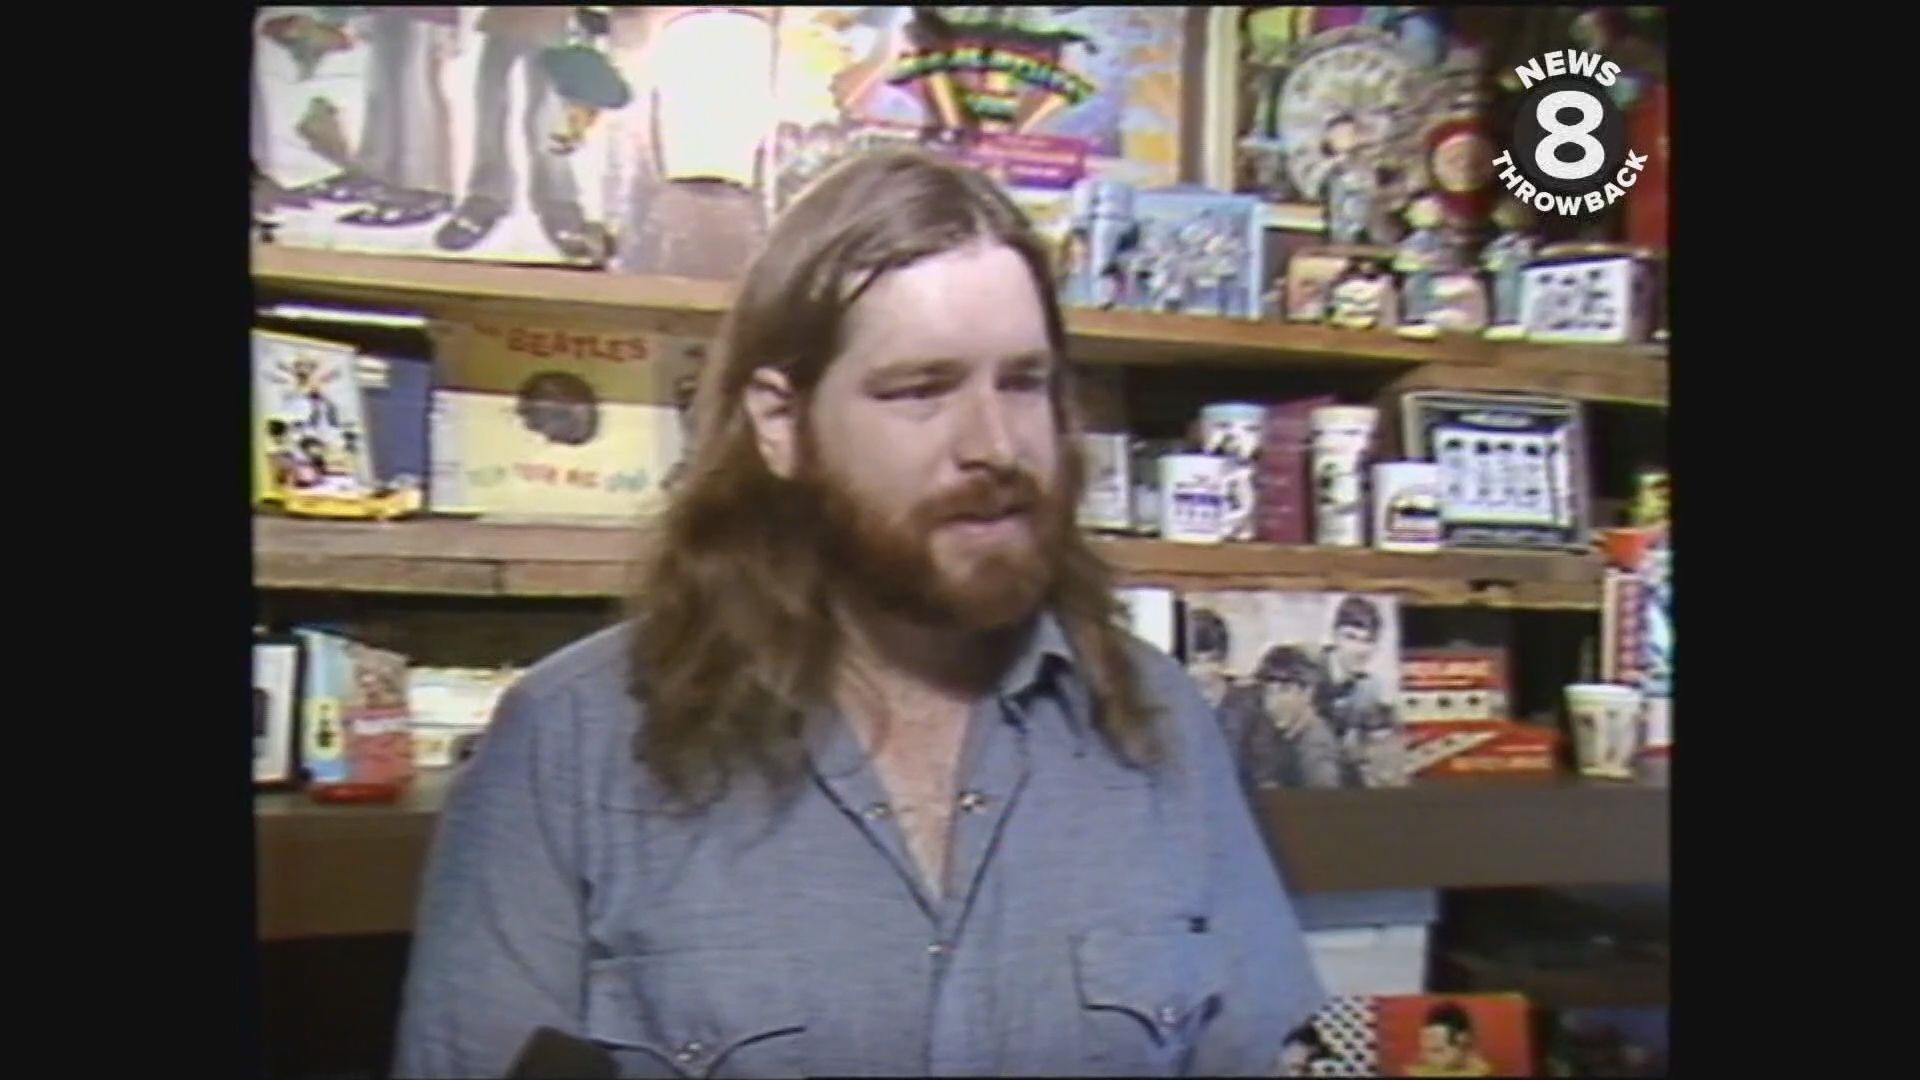 On February 7, 1984, Hal Clement profiled a San Diego's Garry Shrum who had amassed an incredible collection of Beatles memorabilia and owned Blue Meanie Records